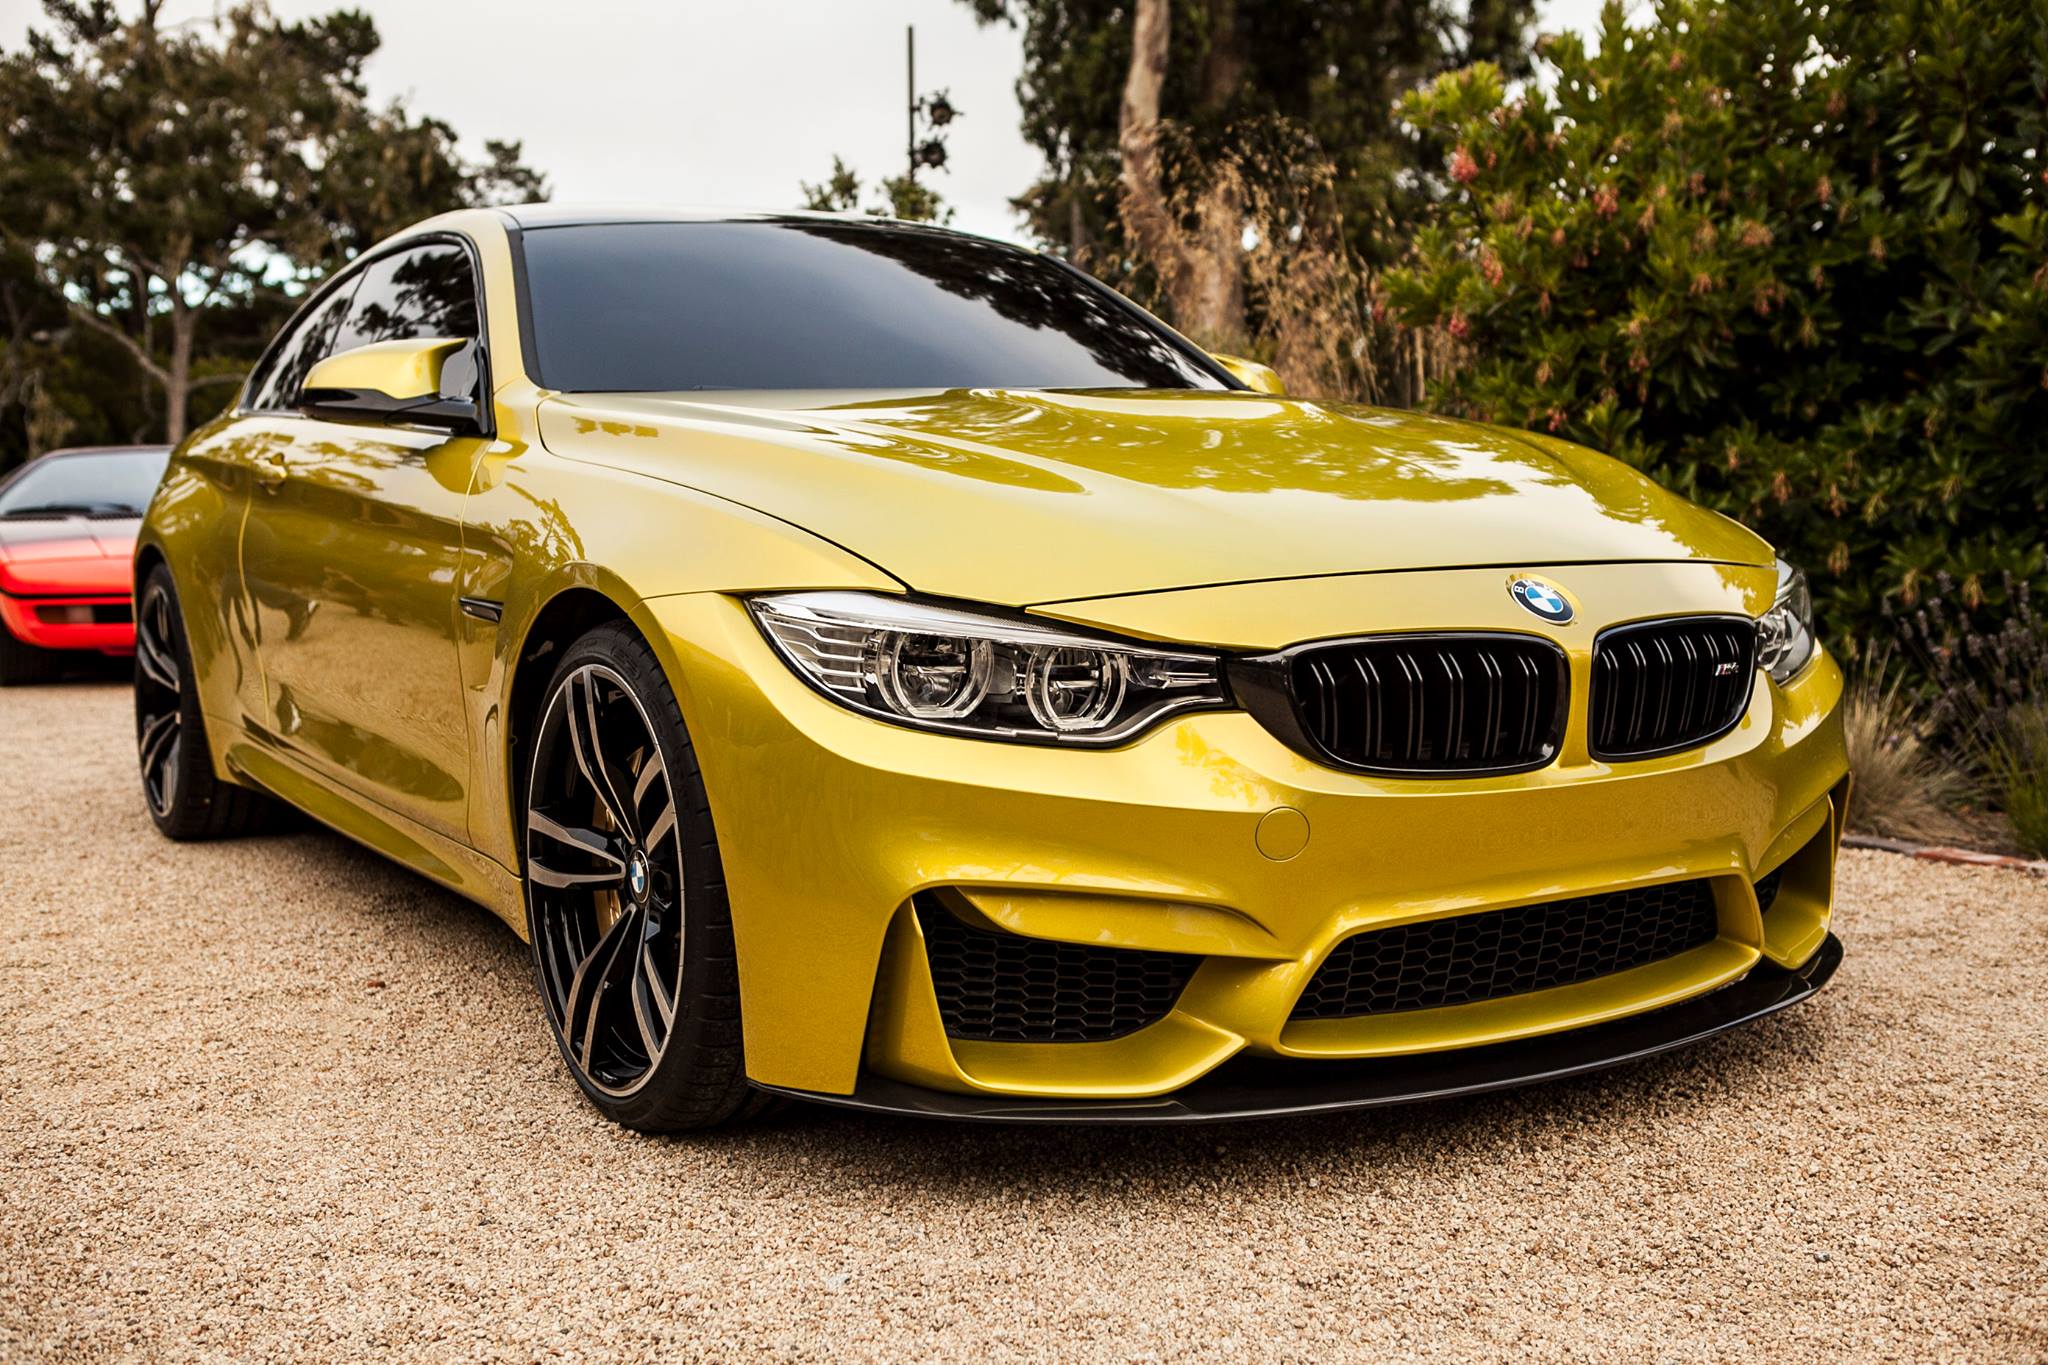 BMW M4 Coupe Concept Appears at Pebble Beach